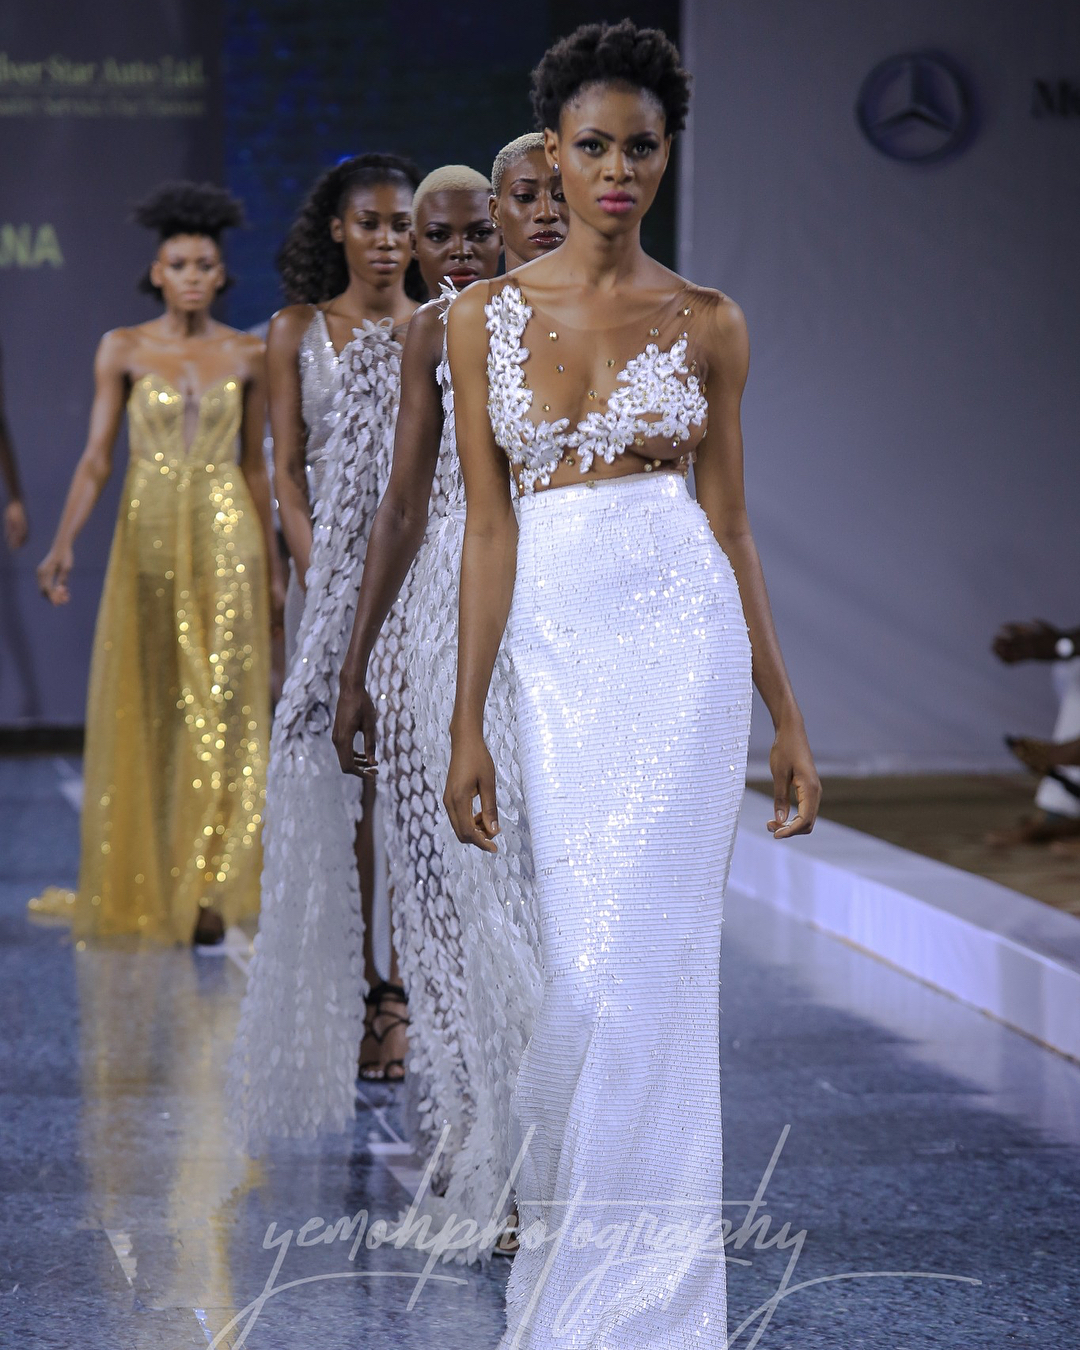 An Inside Look at Mercedes Benz Fashion Week Accra | BN Style